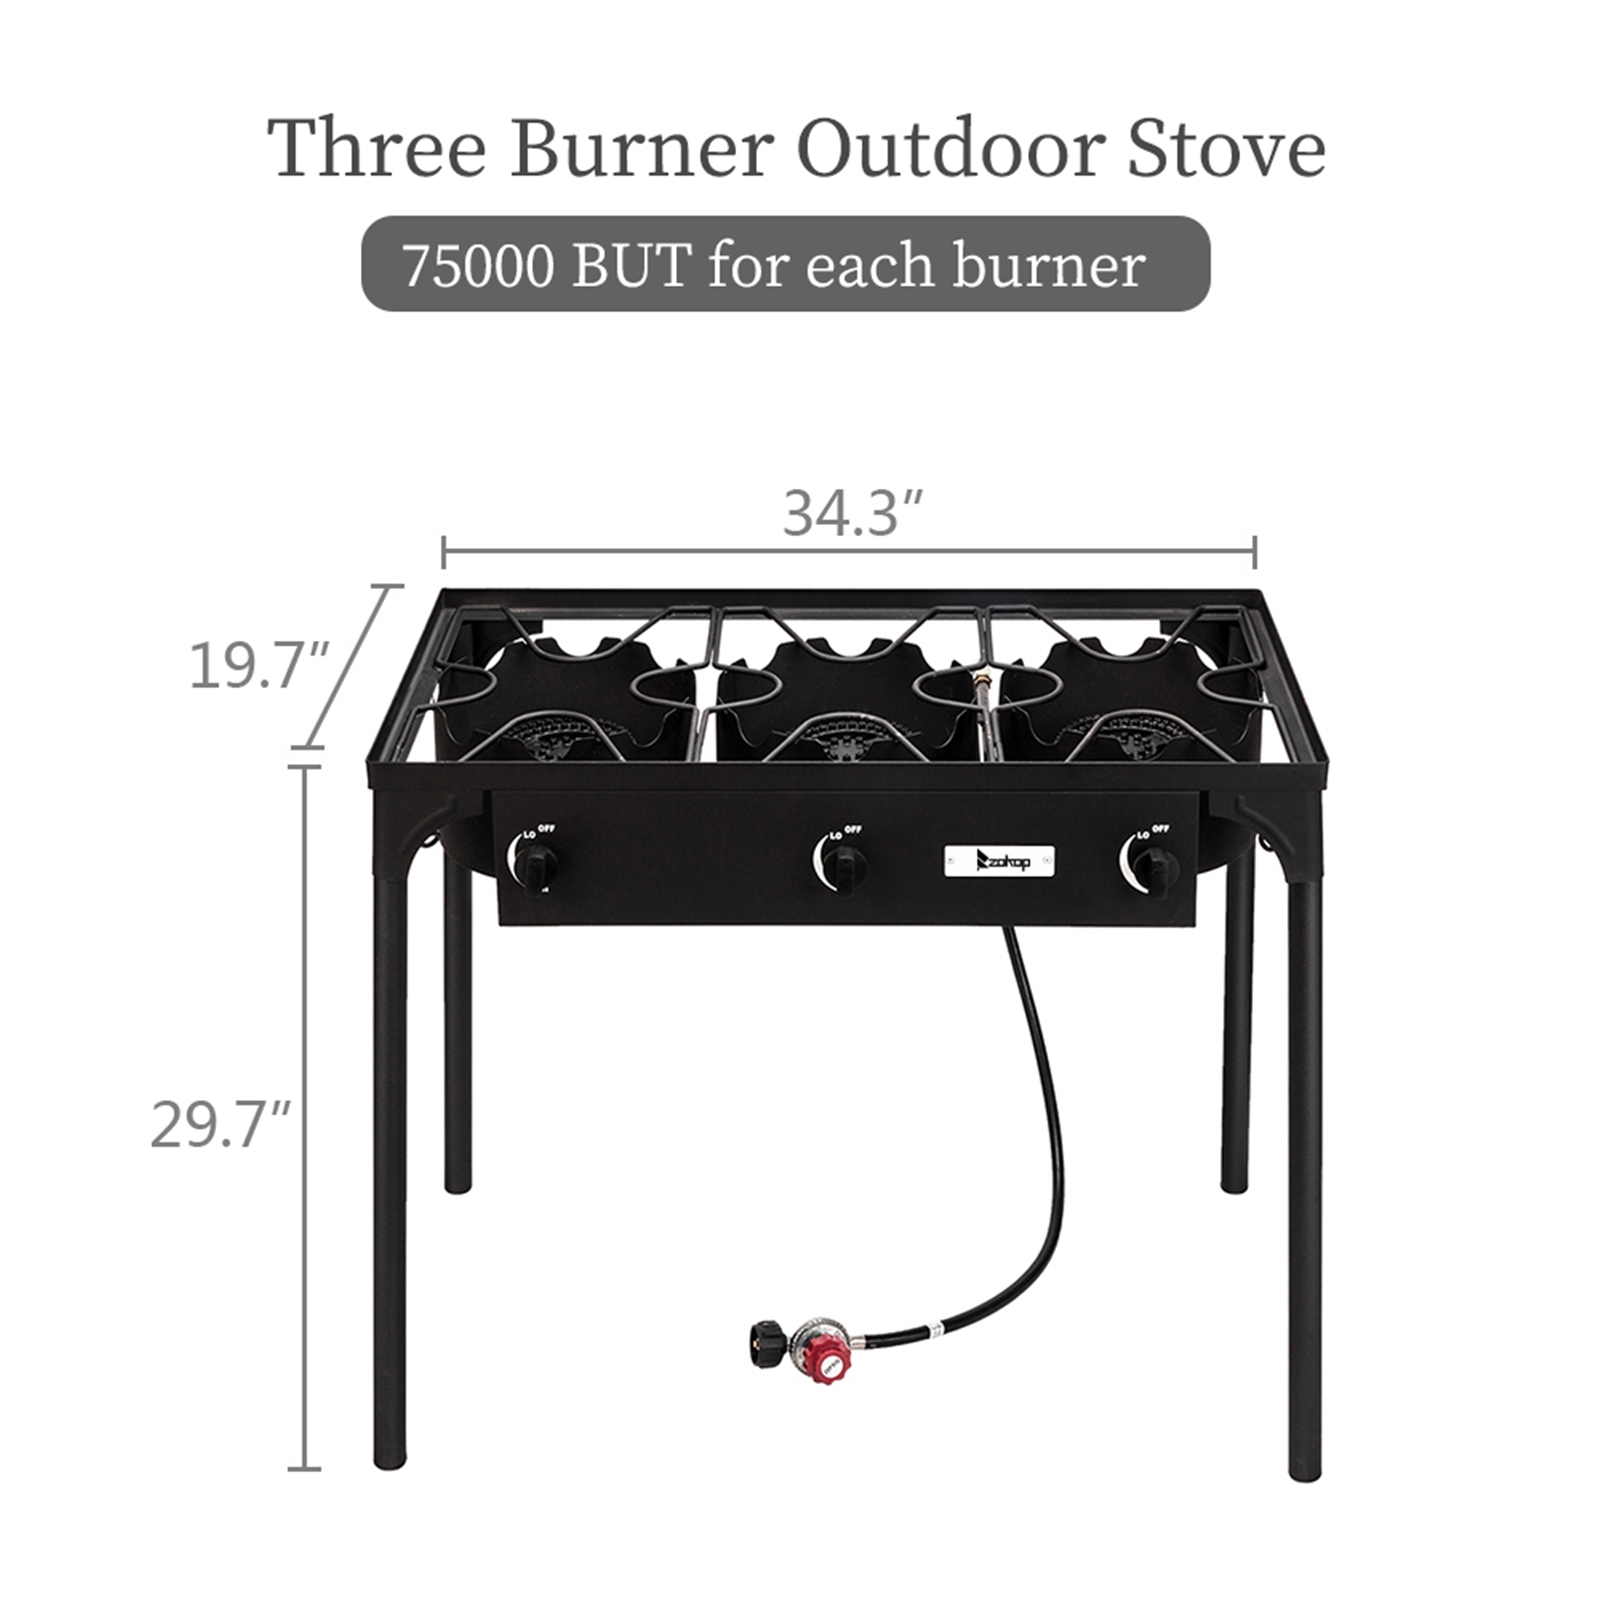 Outdoor Camp Stove, Three Burner Stove, 225, 000 BTU Portable High Pressure Propane-Powered Cooktop with Removable Legs, Portable Cast Iron Patio Cooking Burner Gas Cooker - image 2 of 9